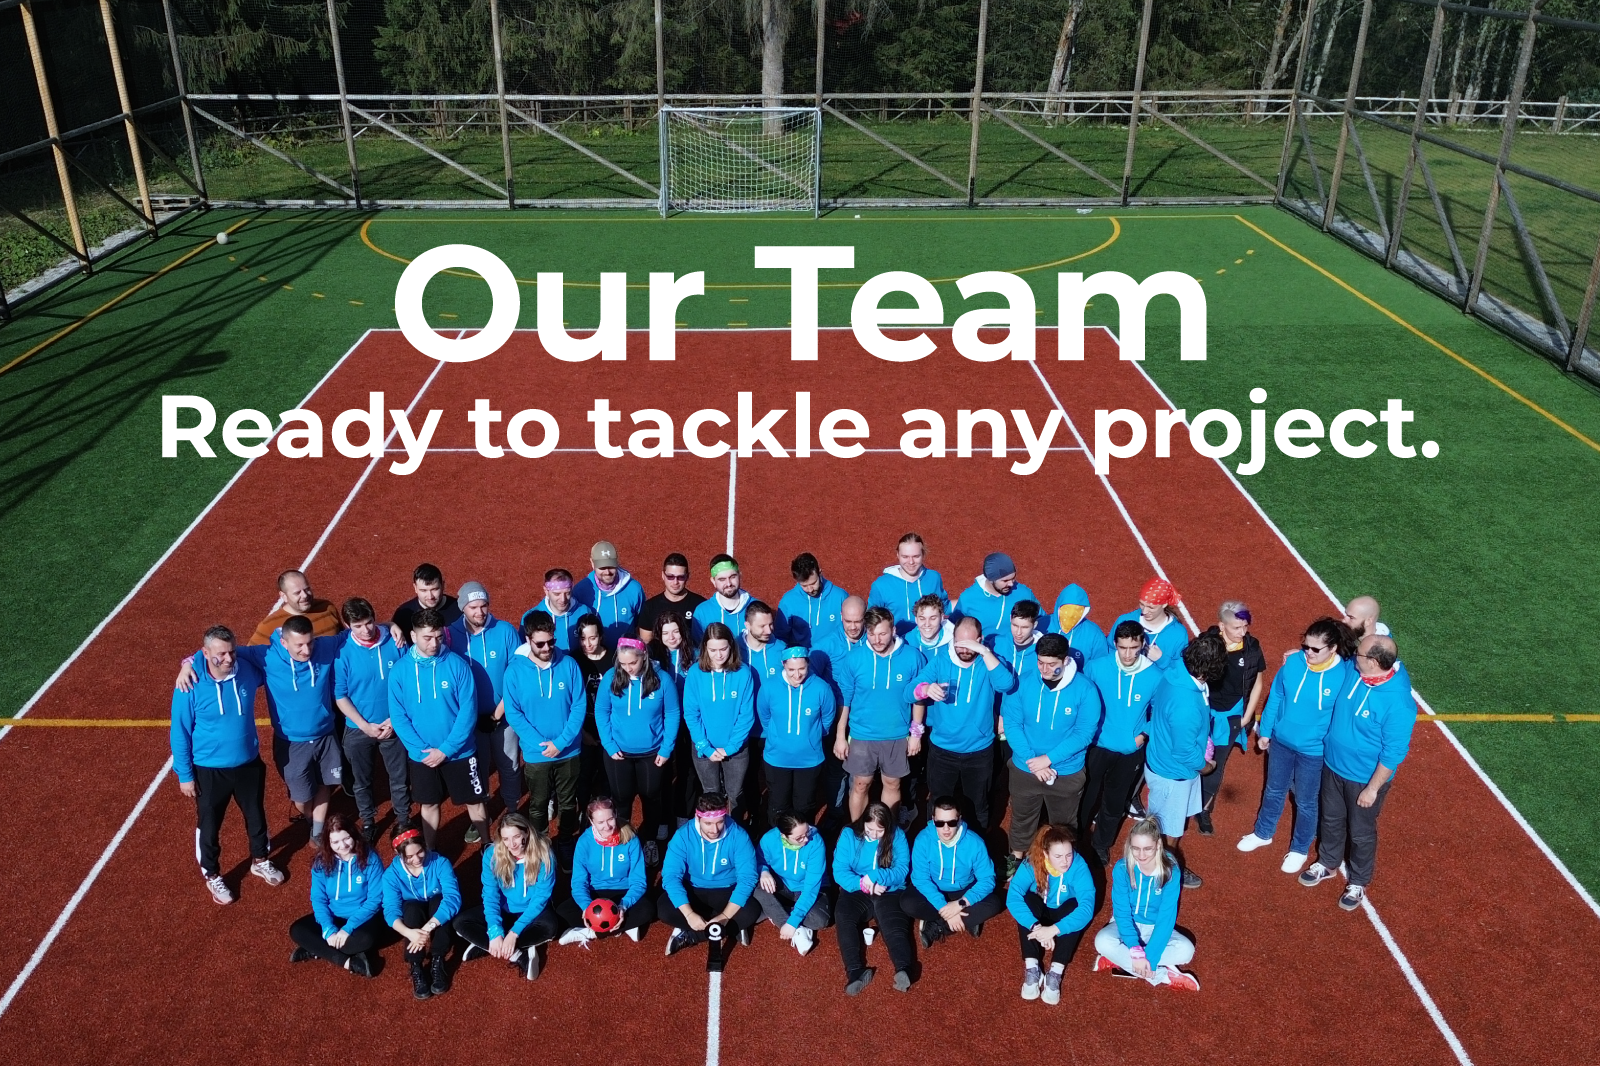 Team Ontegra posed together on a sports field, symbolizing teamwork and readiness to tackle complex projects.